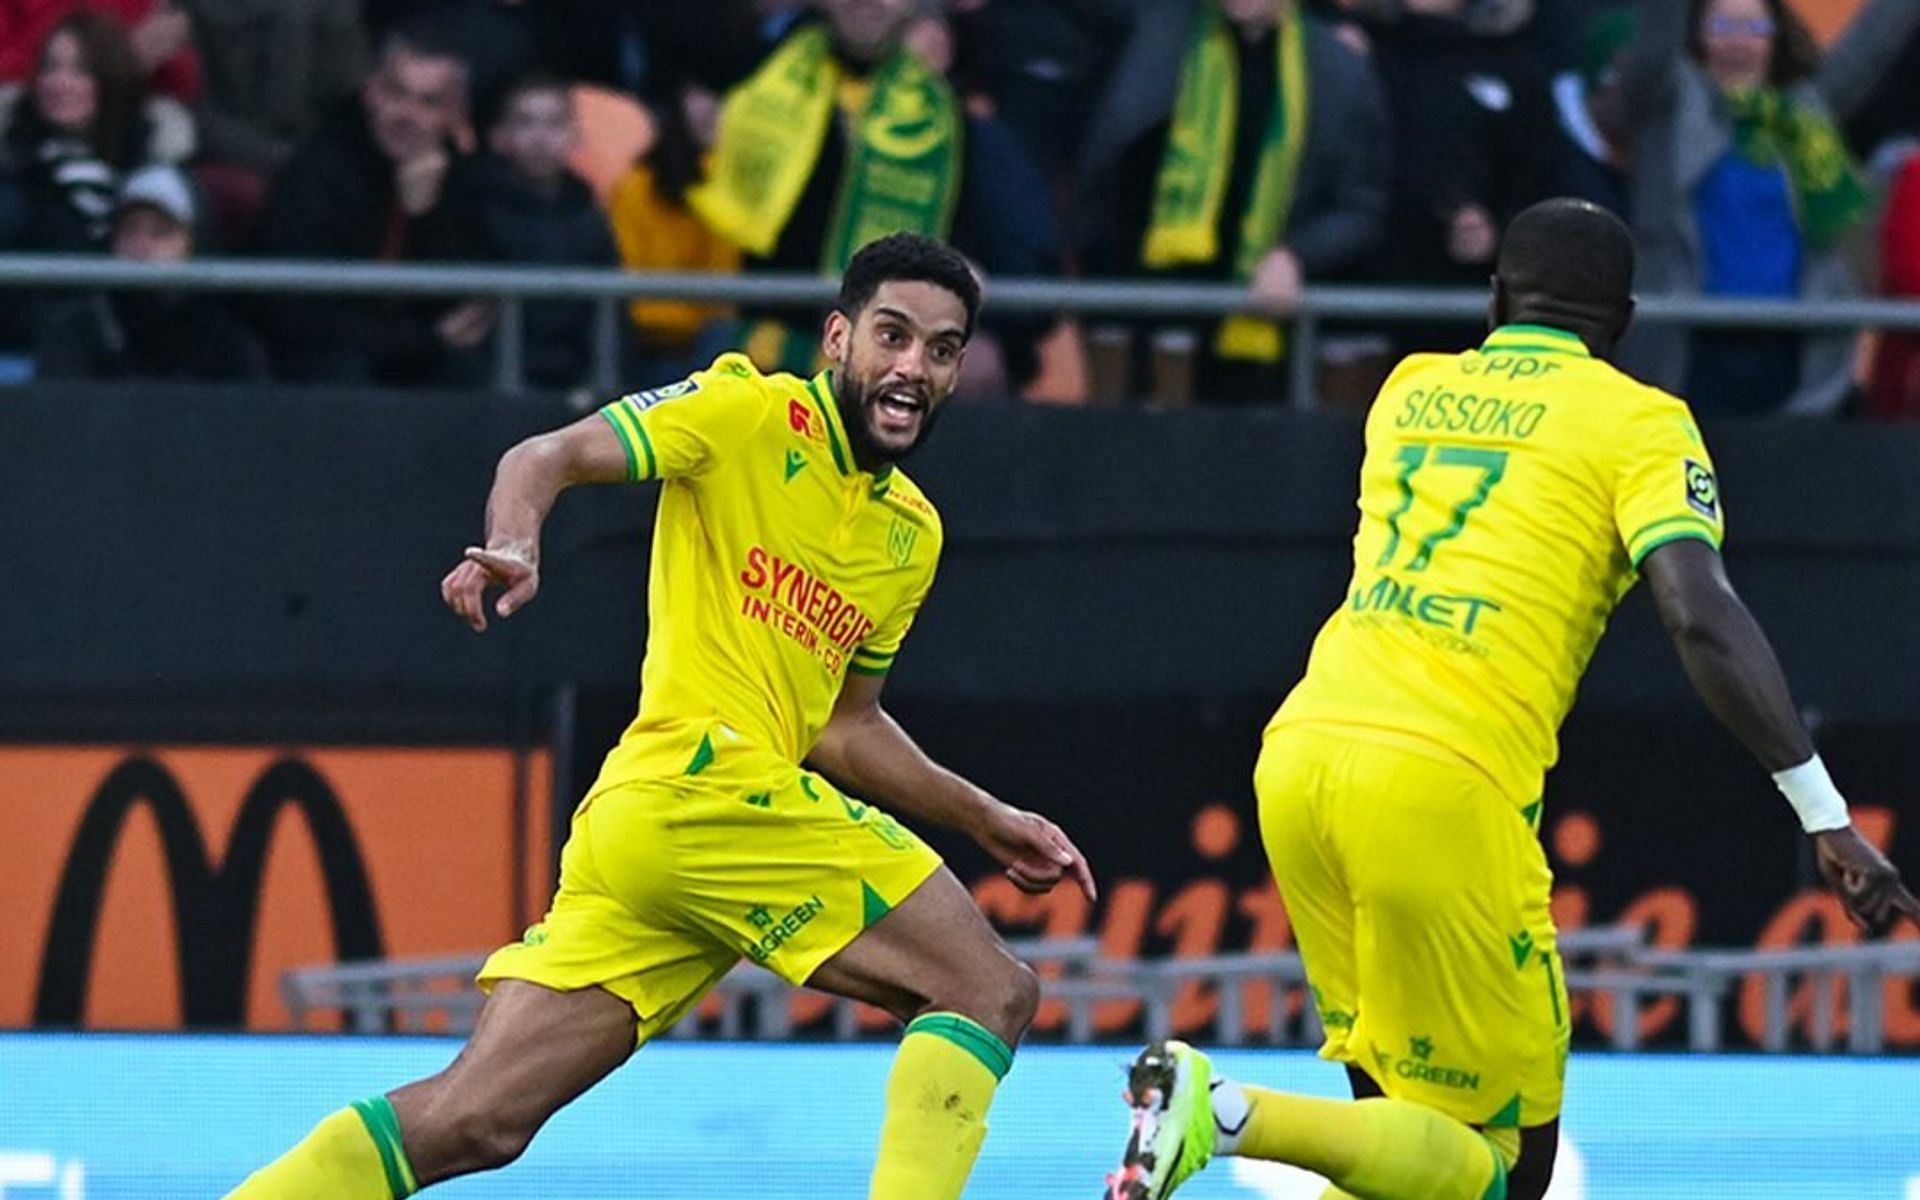 Can Nantes pull off a victory at home this weekend?